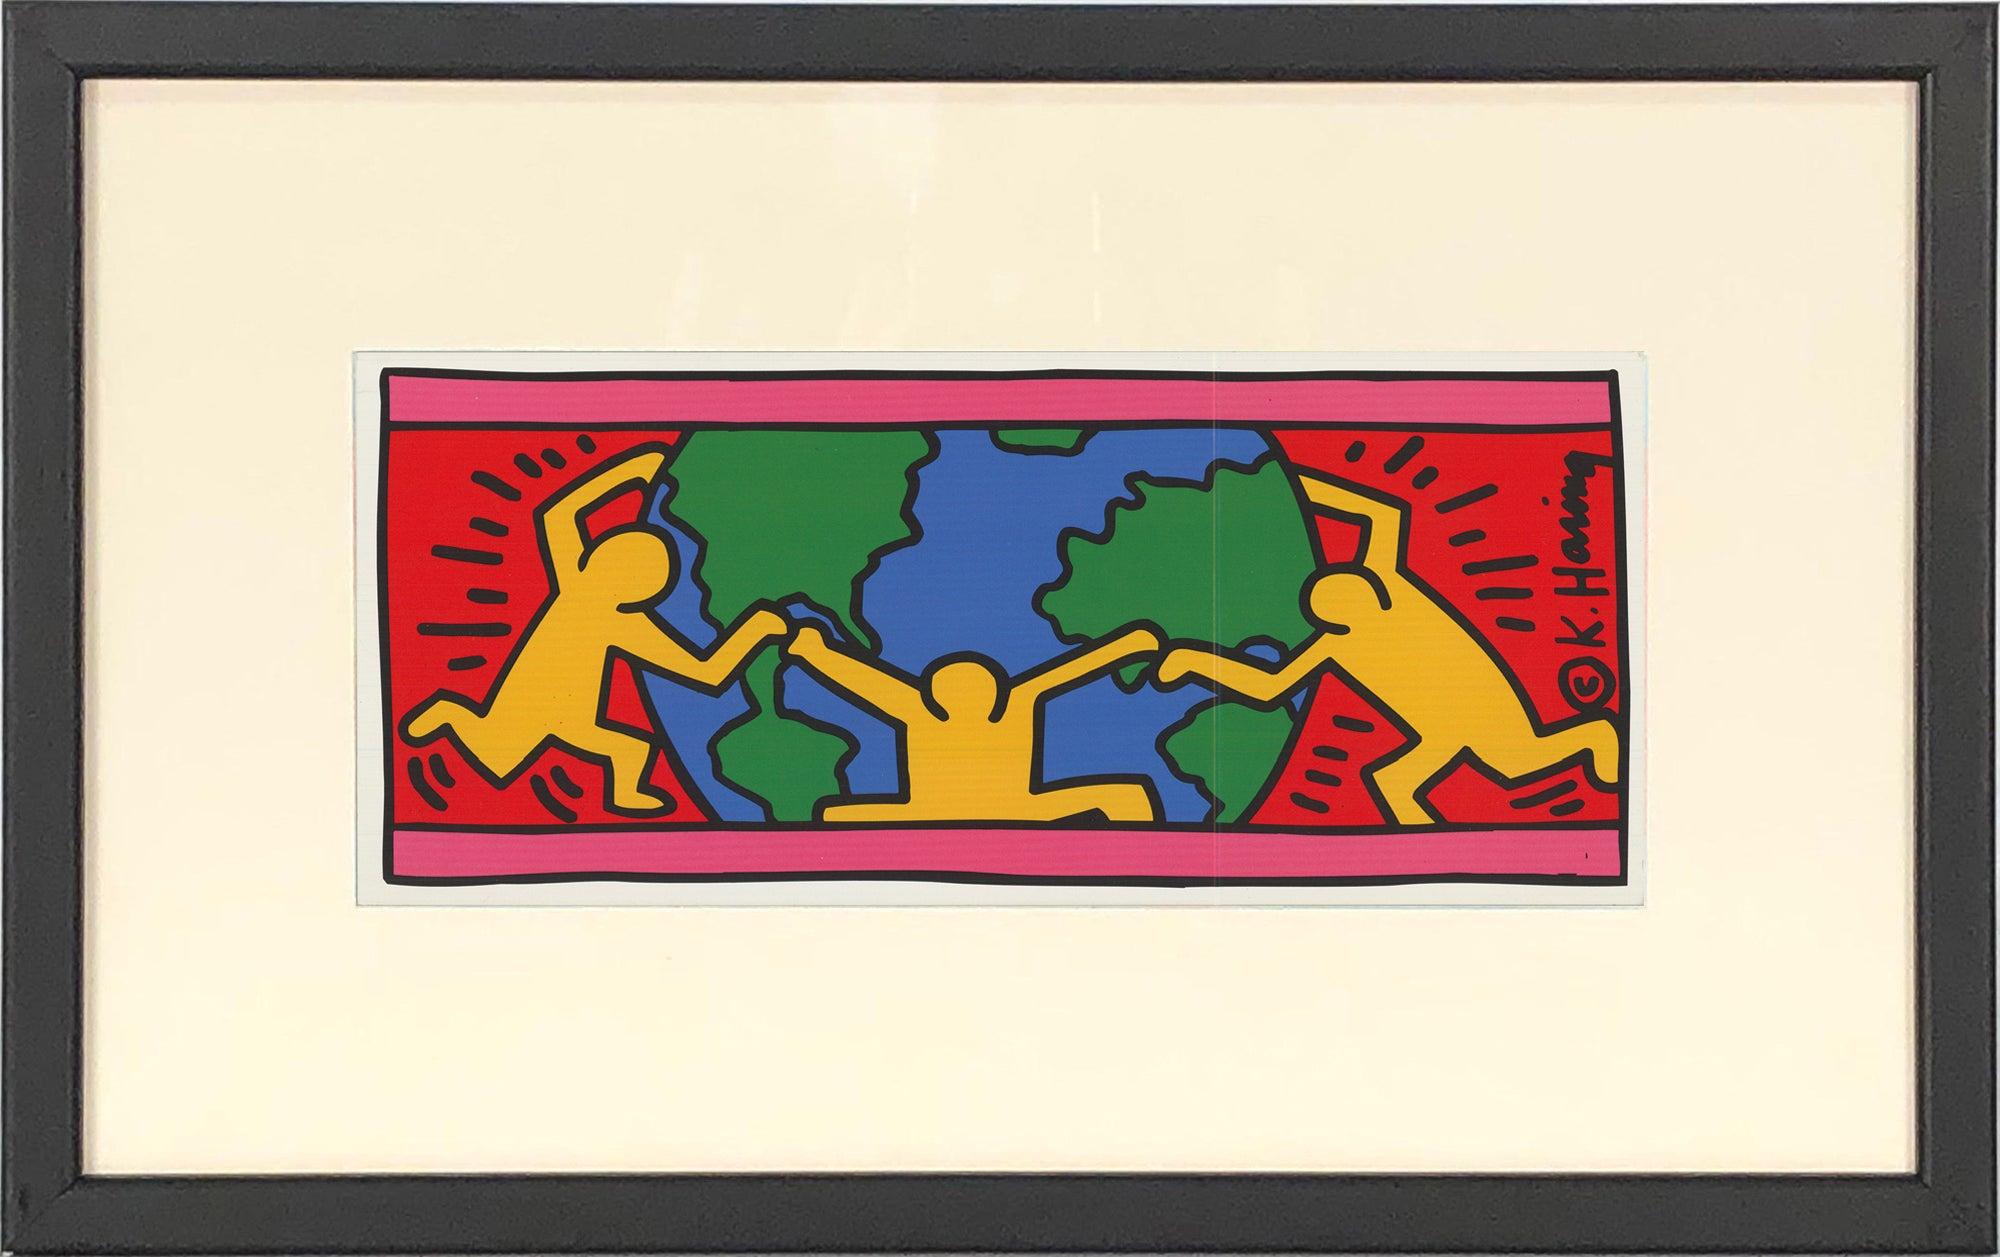 1998 Keith Haring 'World' Pop Art Offset Lithograph Framed - Print by (after) Keith Haring